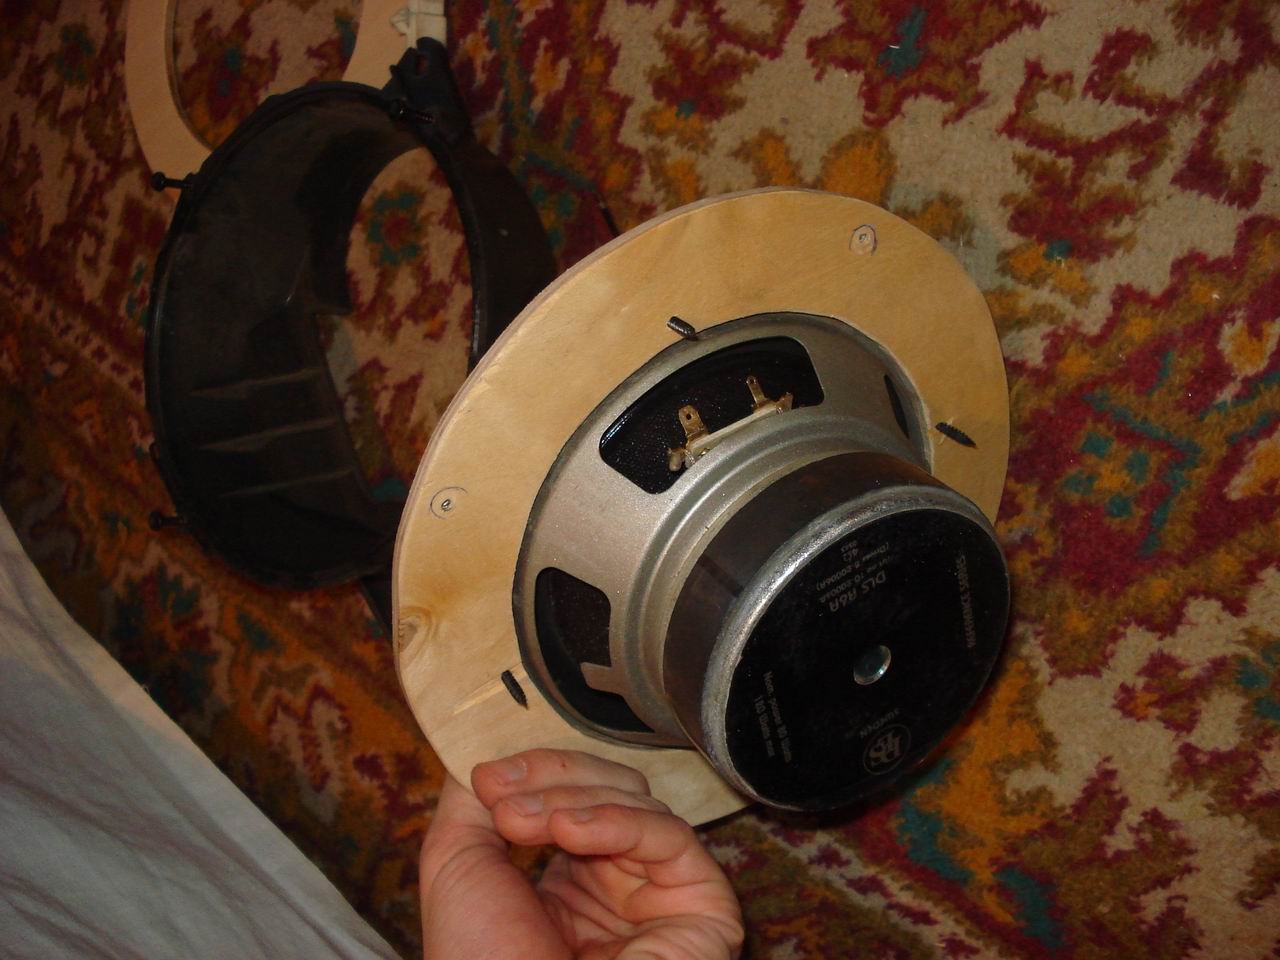 Replacing the stock 20 cm speakers with 16 cm DLS - Toyota Celica 20 L 1998 with DRIVE2